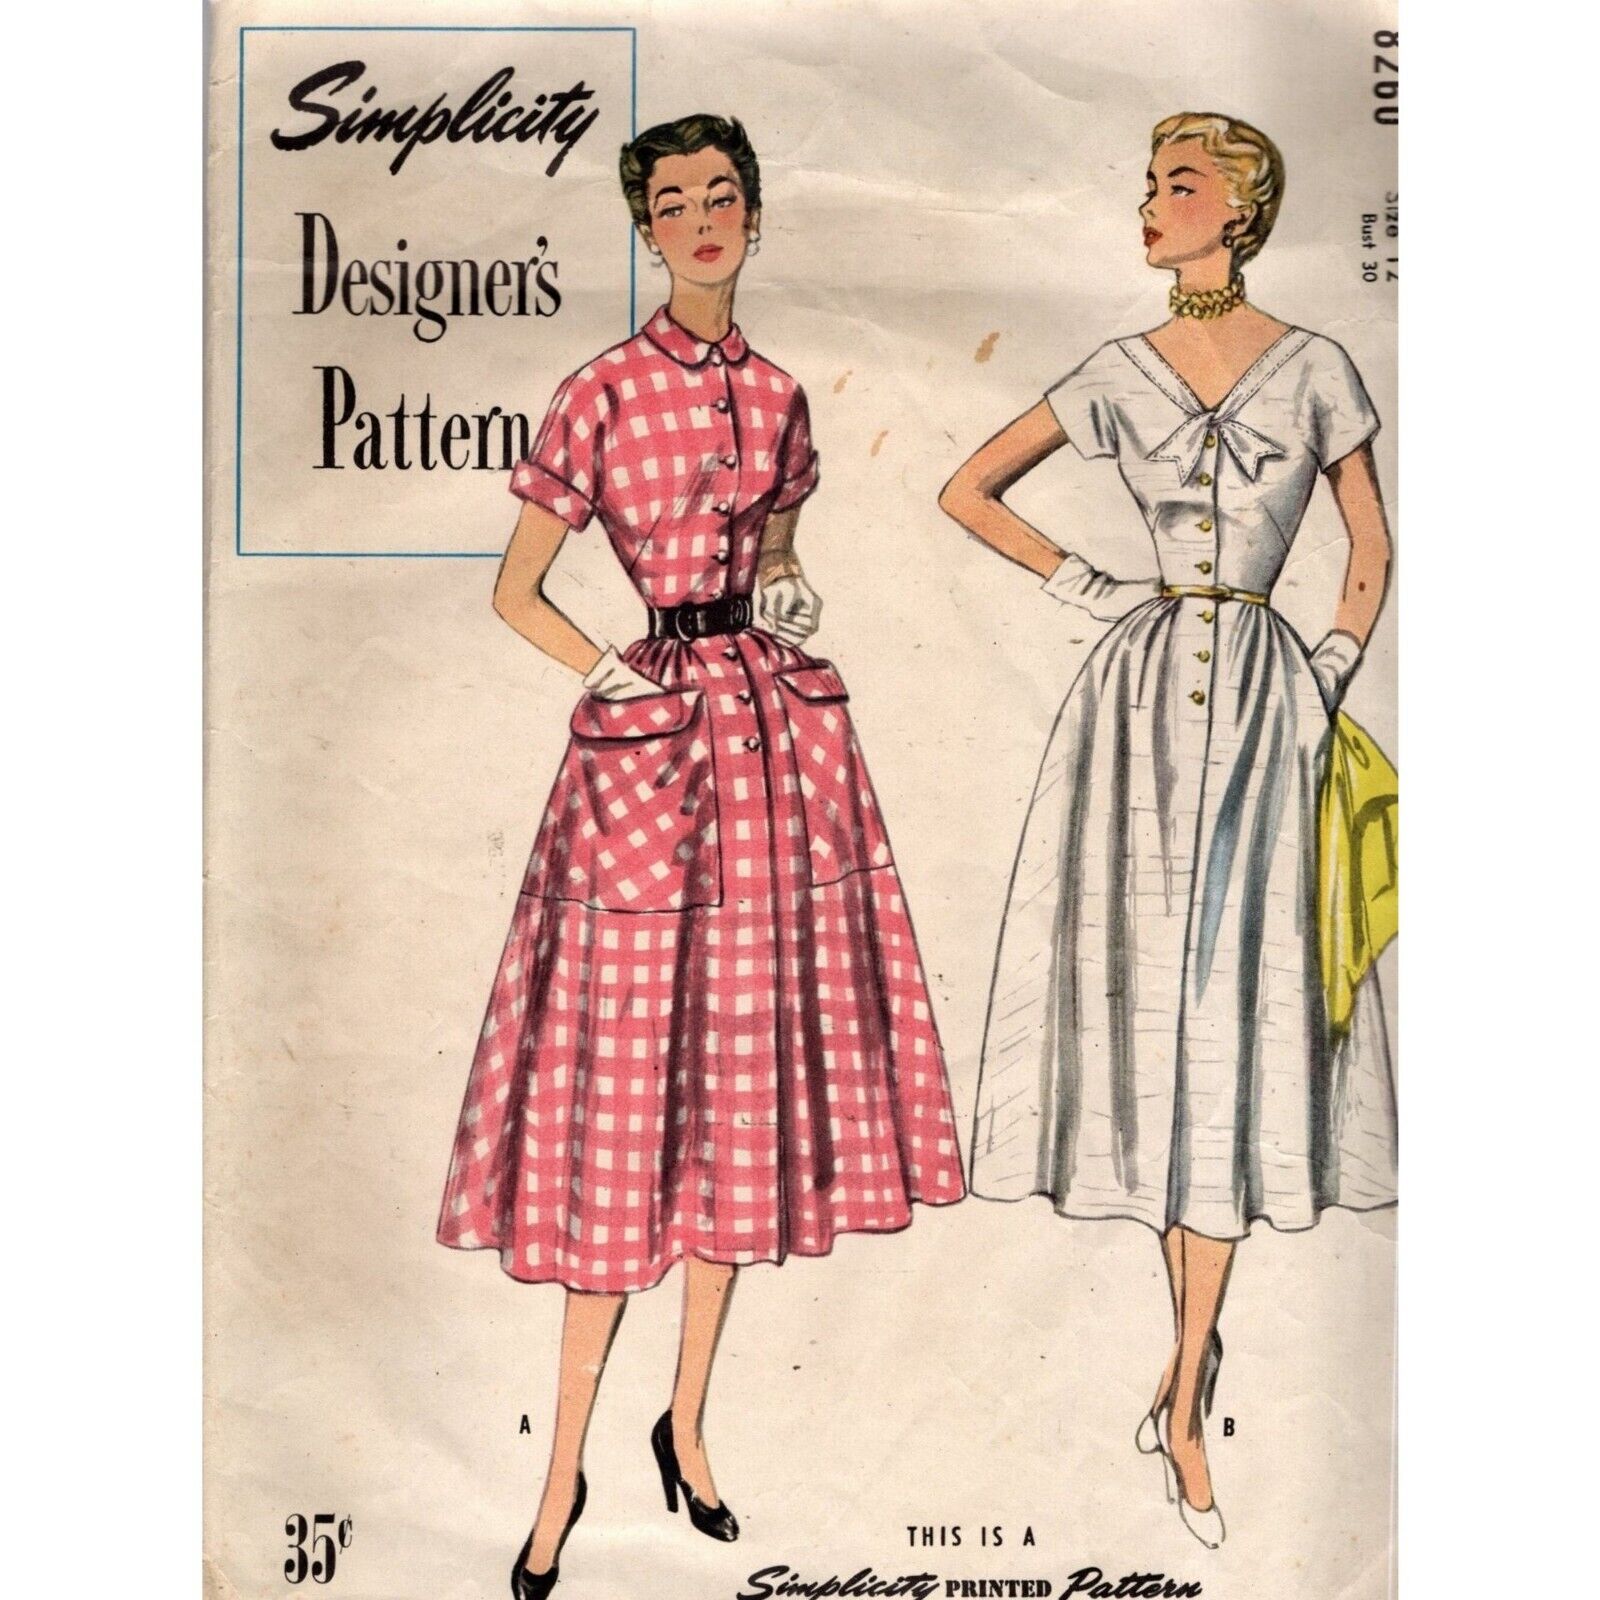 Vtg 50's One Piece Dress Sewing Pattern  Simplicity Designers no. 8260 Size 12